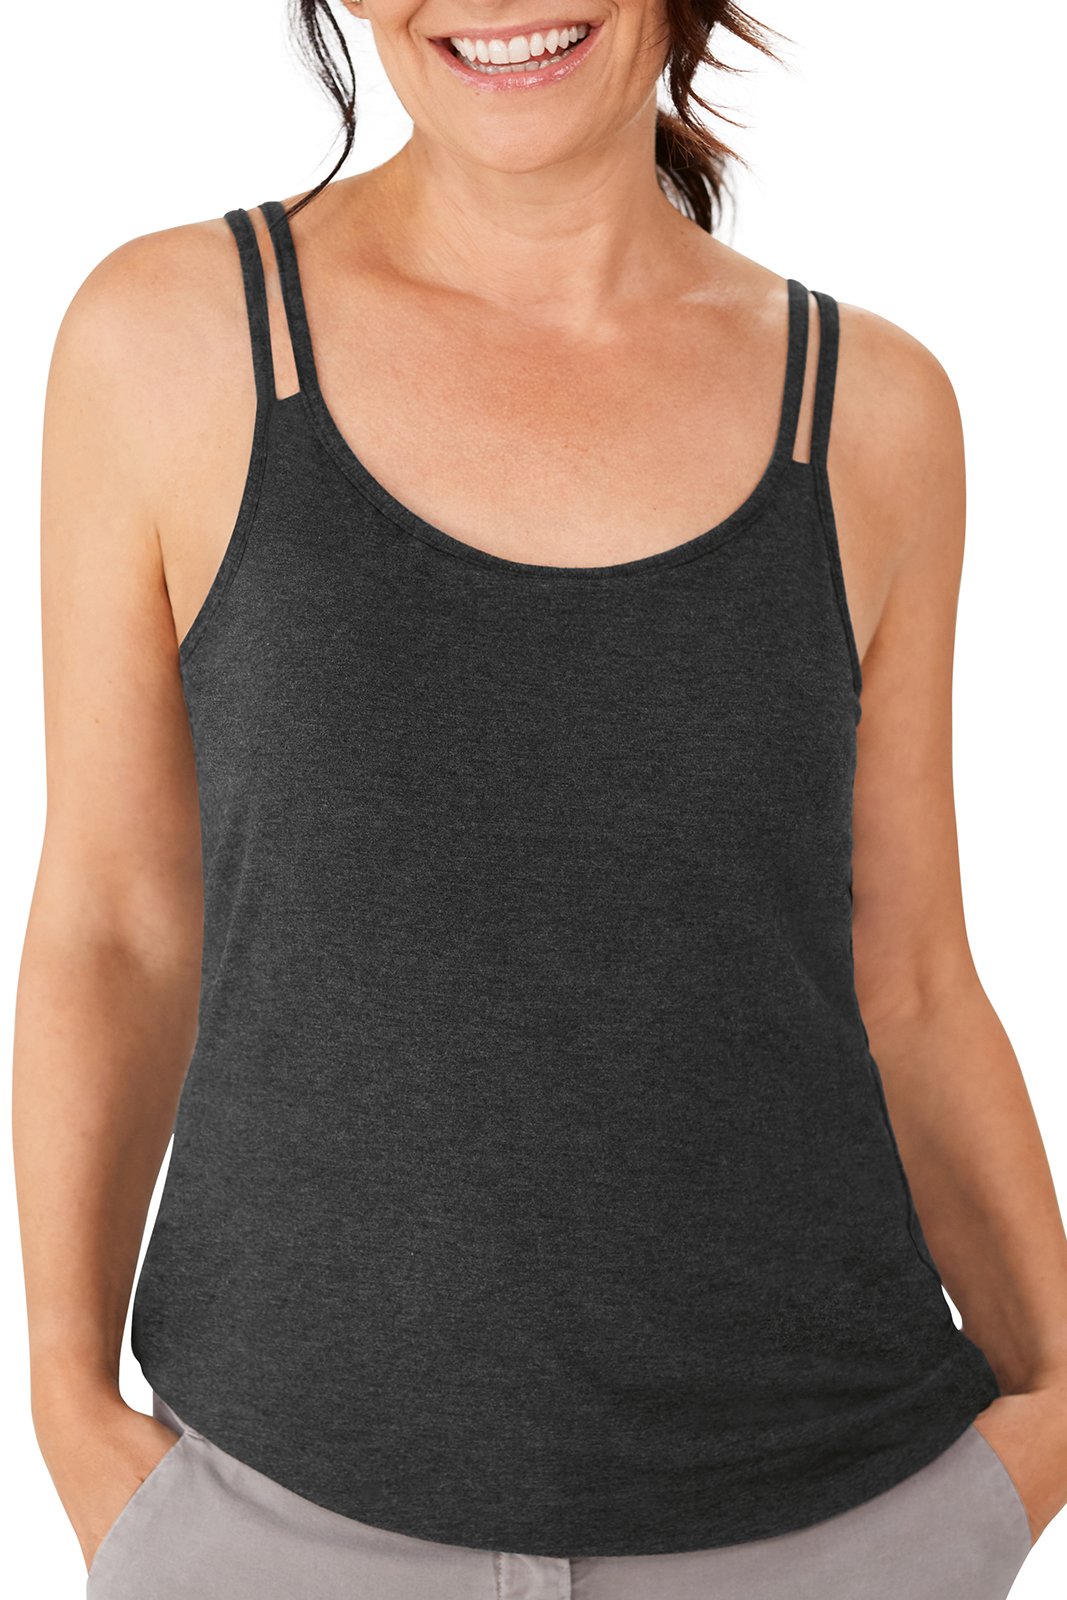 V FOR CITY Camisole for Women with Built-in Shelf Palestine